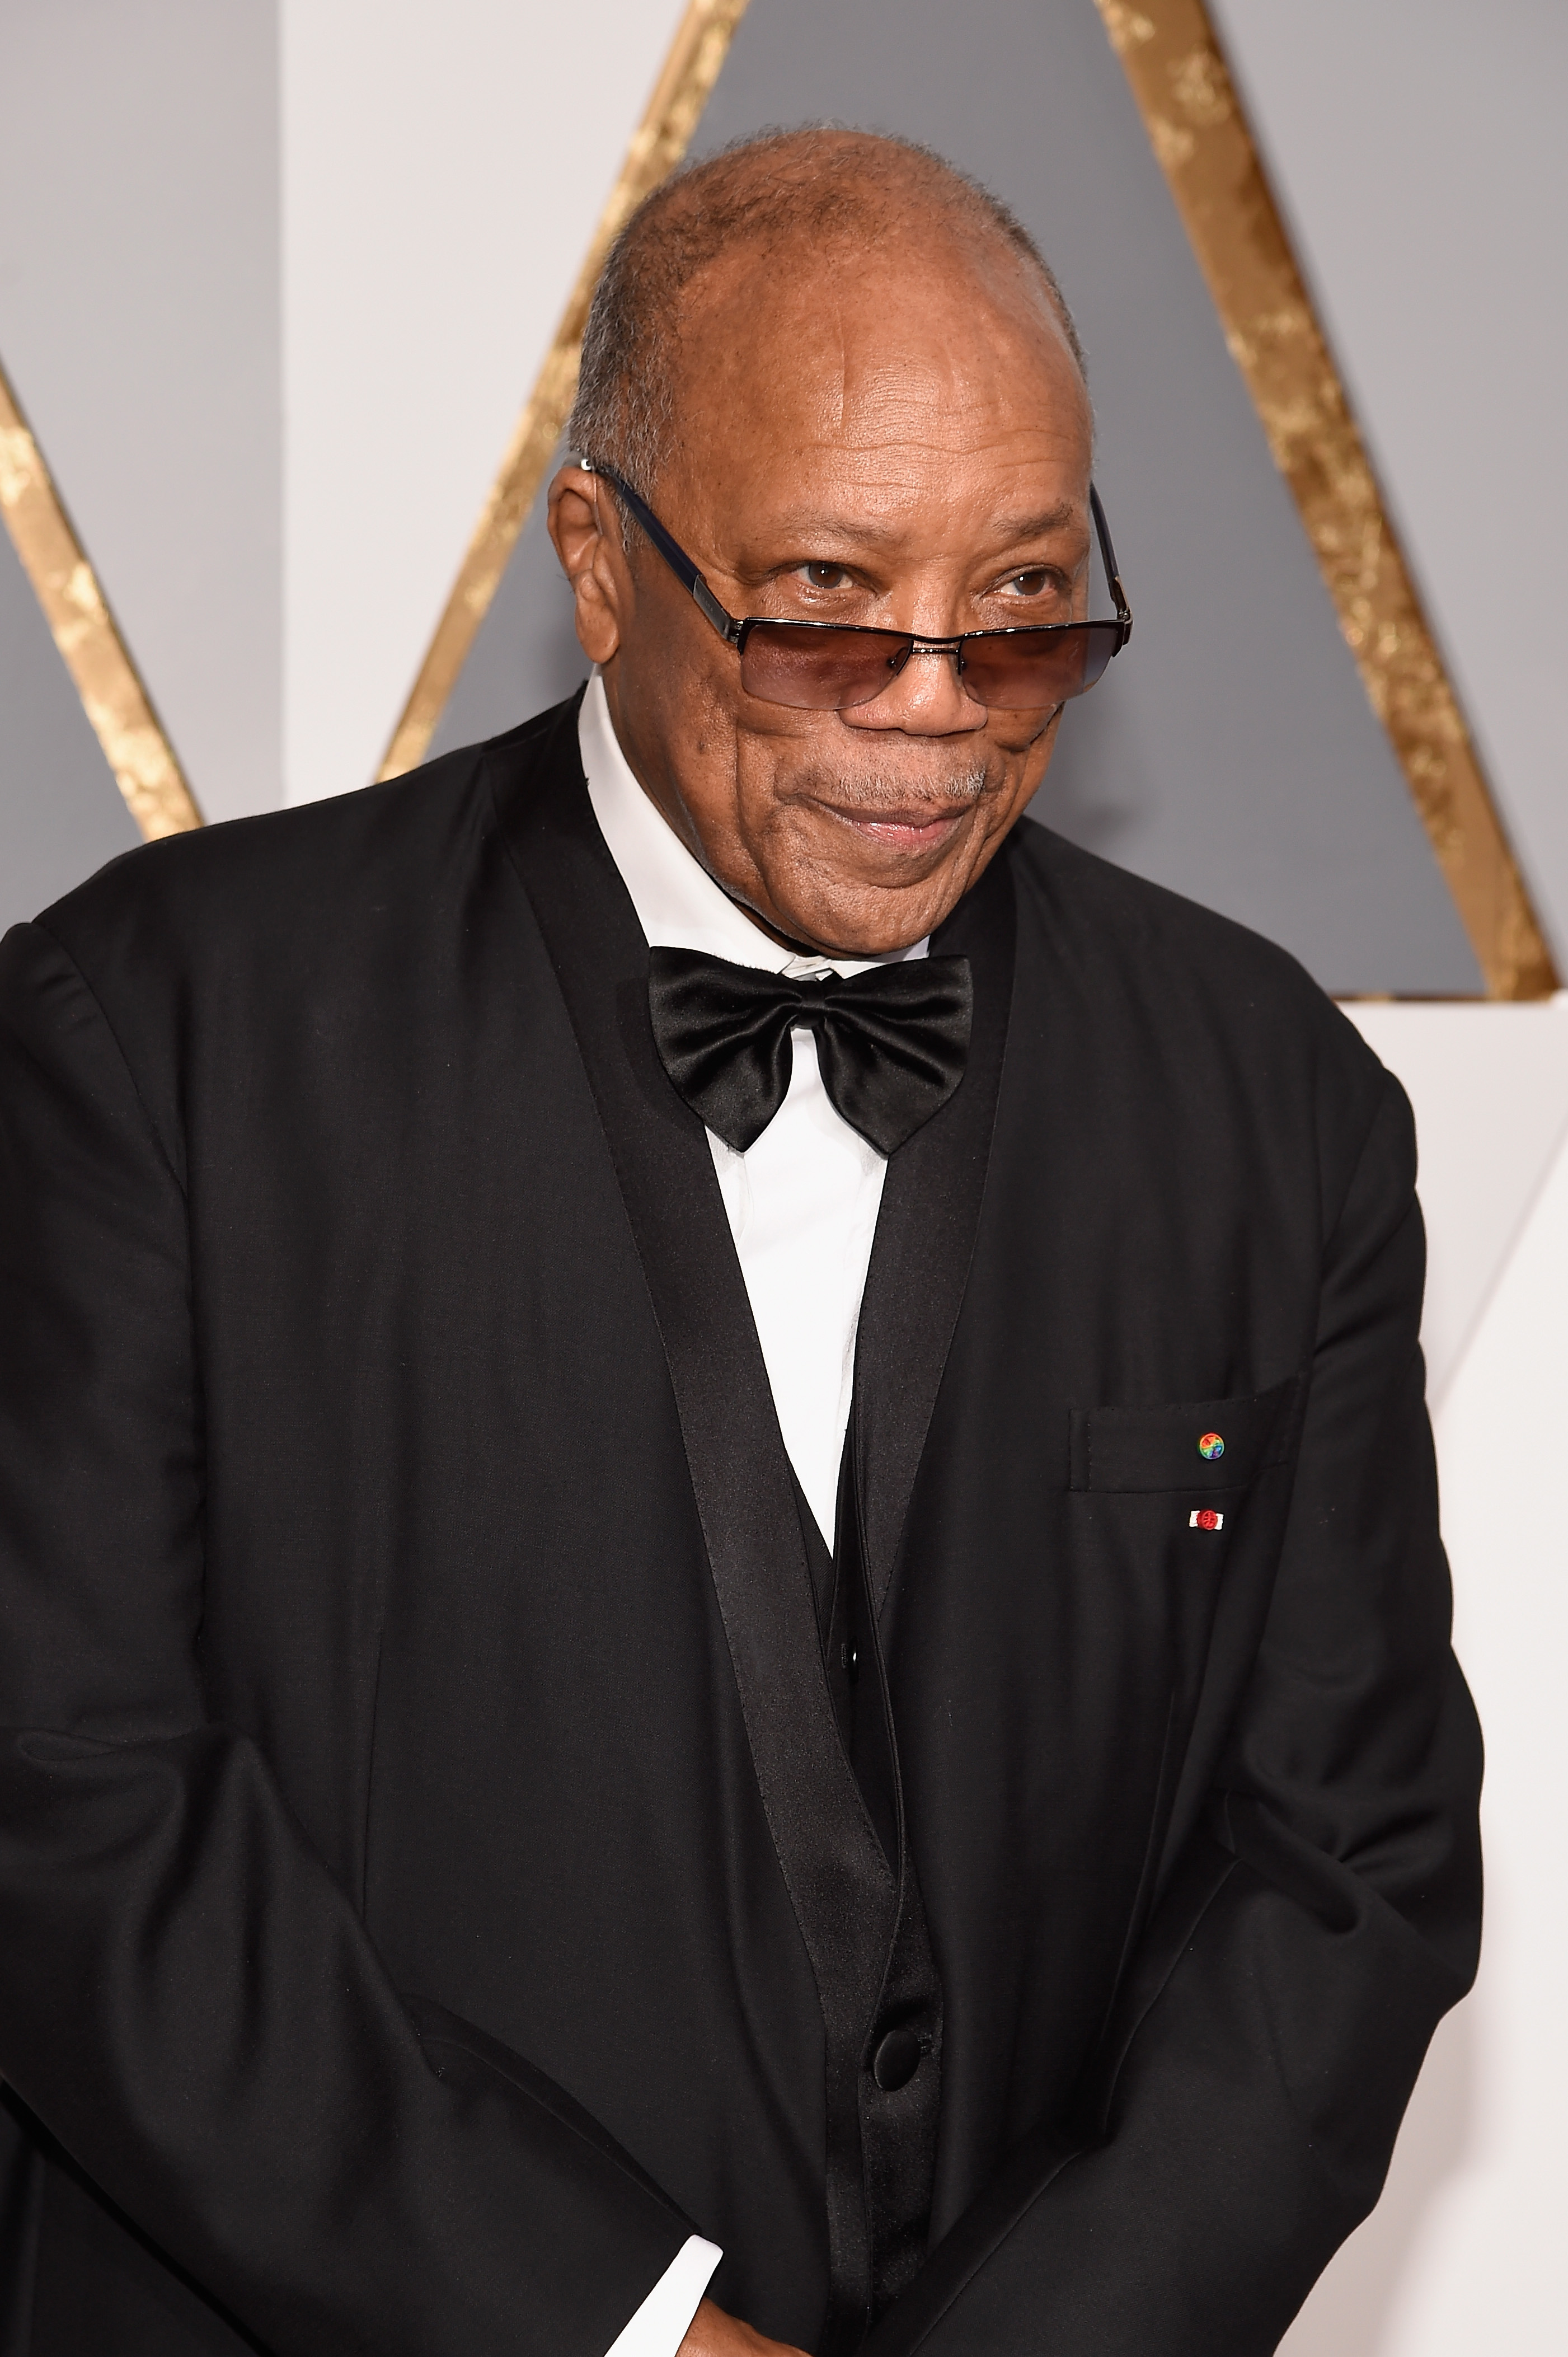 Record producer Quincy Jones attends the 88th Annual Academy Awards.(Photo by Kevork Djansezian/Getty Images)